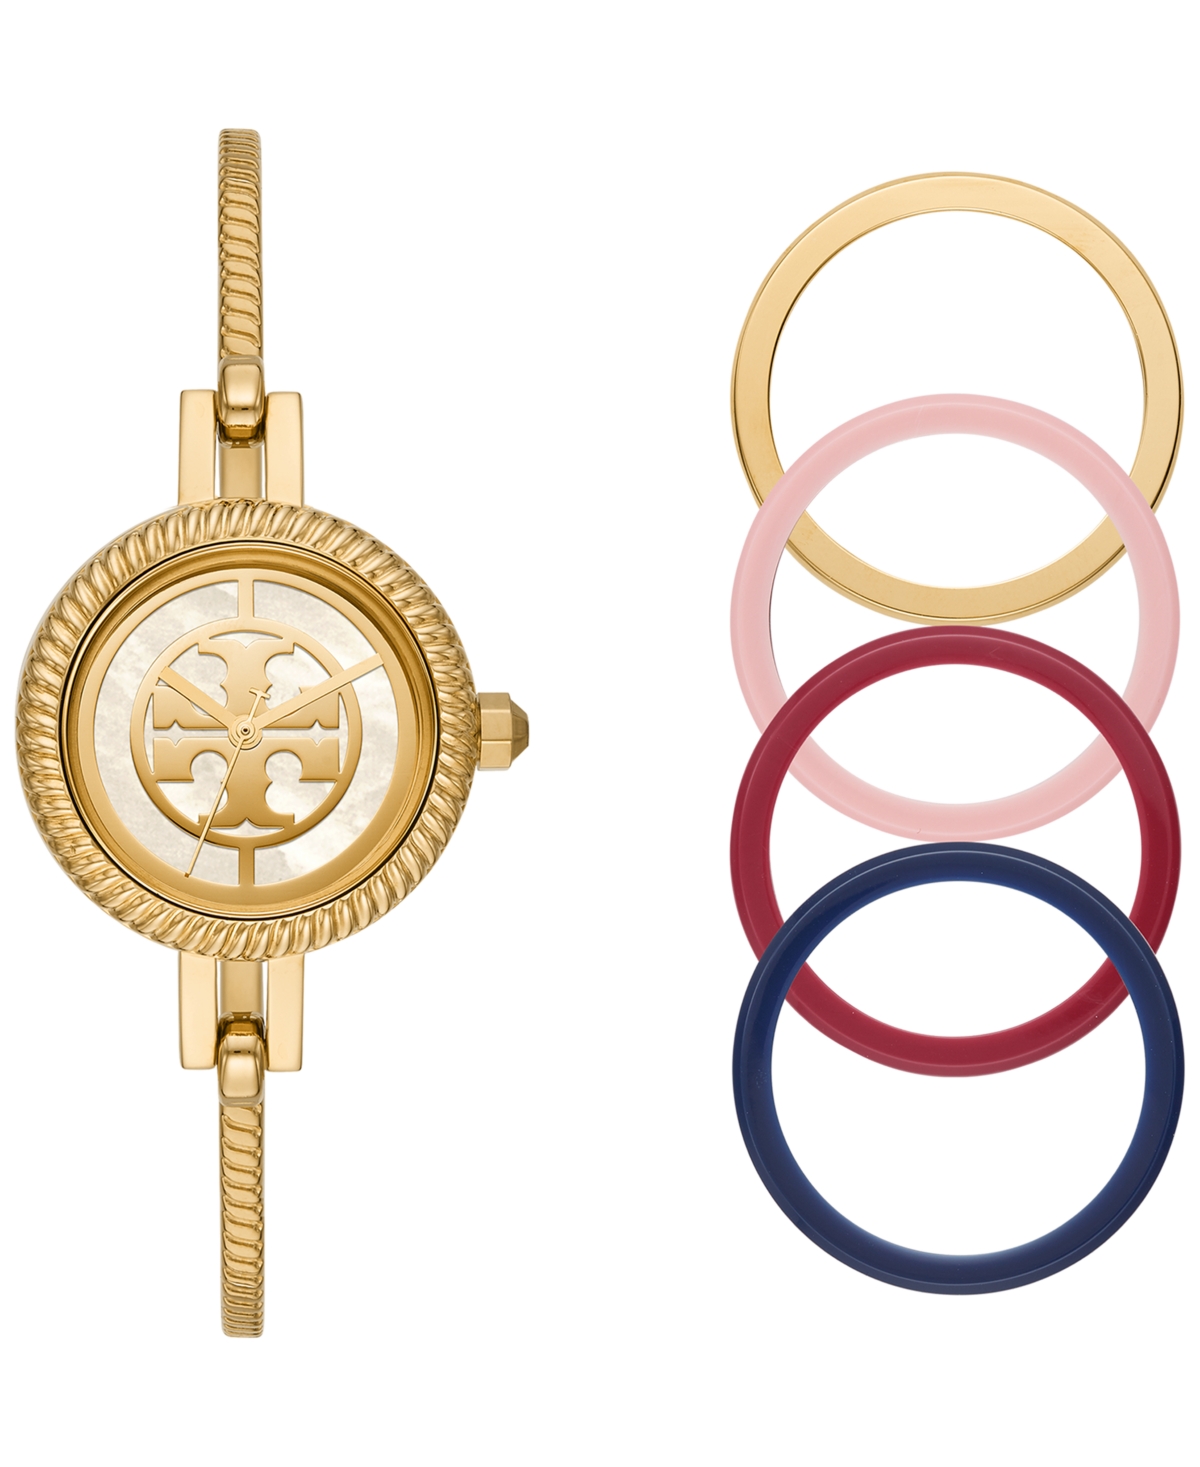 Tory Burch Women's Reva Gold-Tone Stainless Steel Bangle Bracelet Watch  27mm Gift Set & Reviews - All Watches - Jewelry & Watches - Macy's